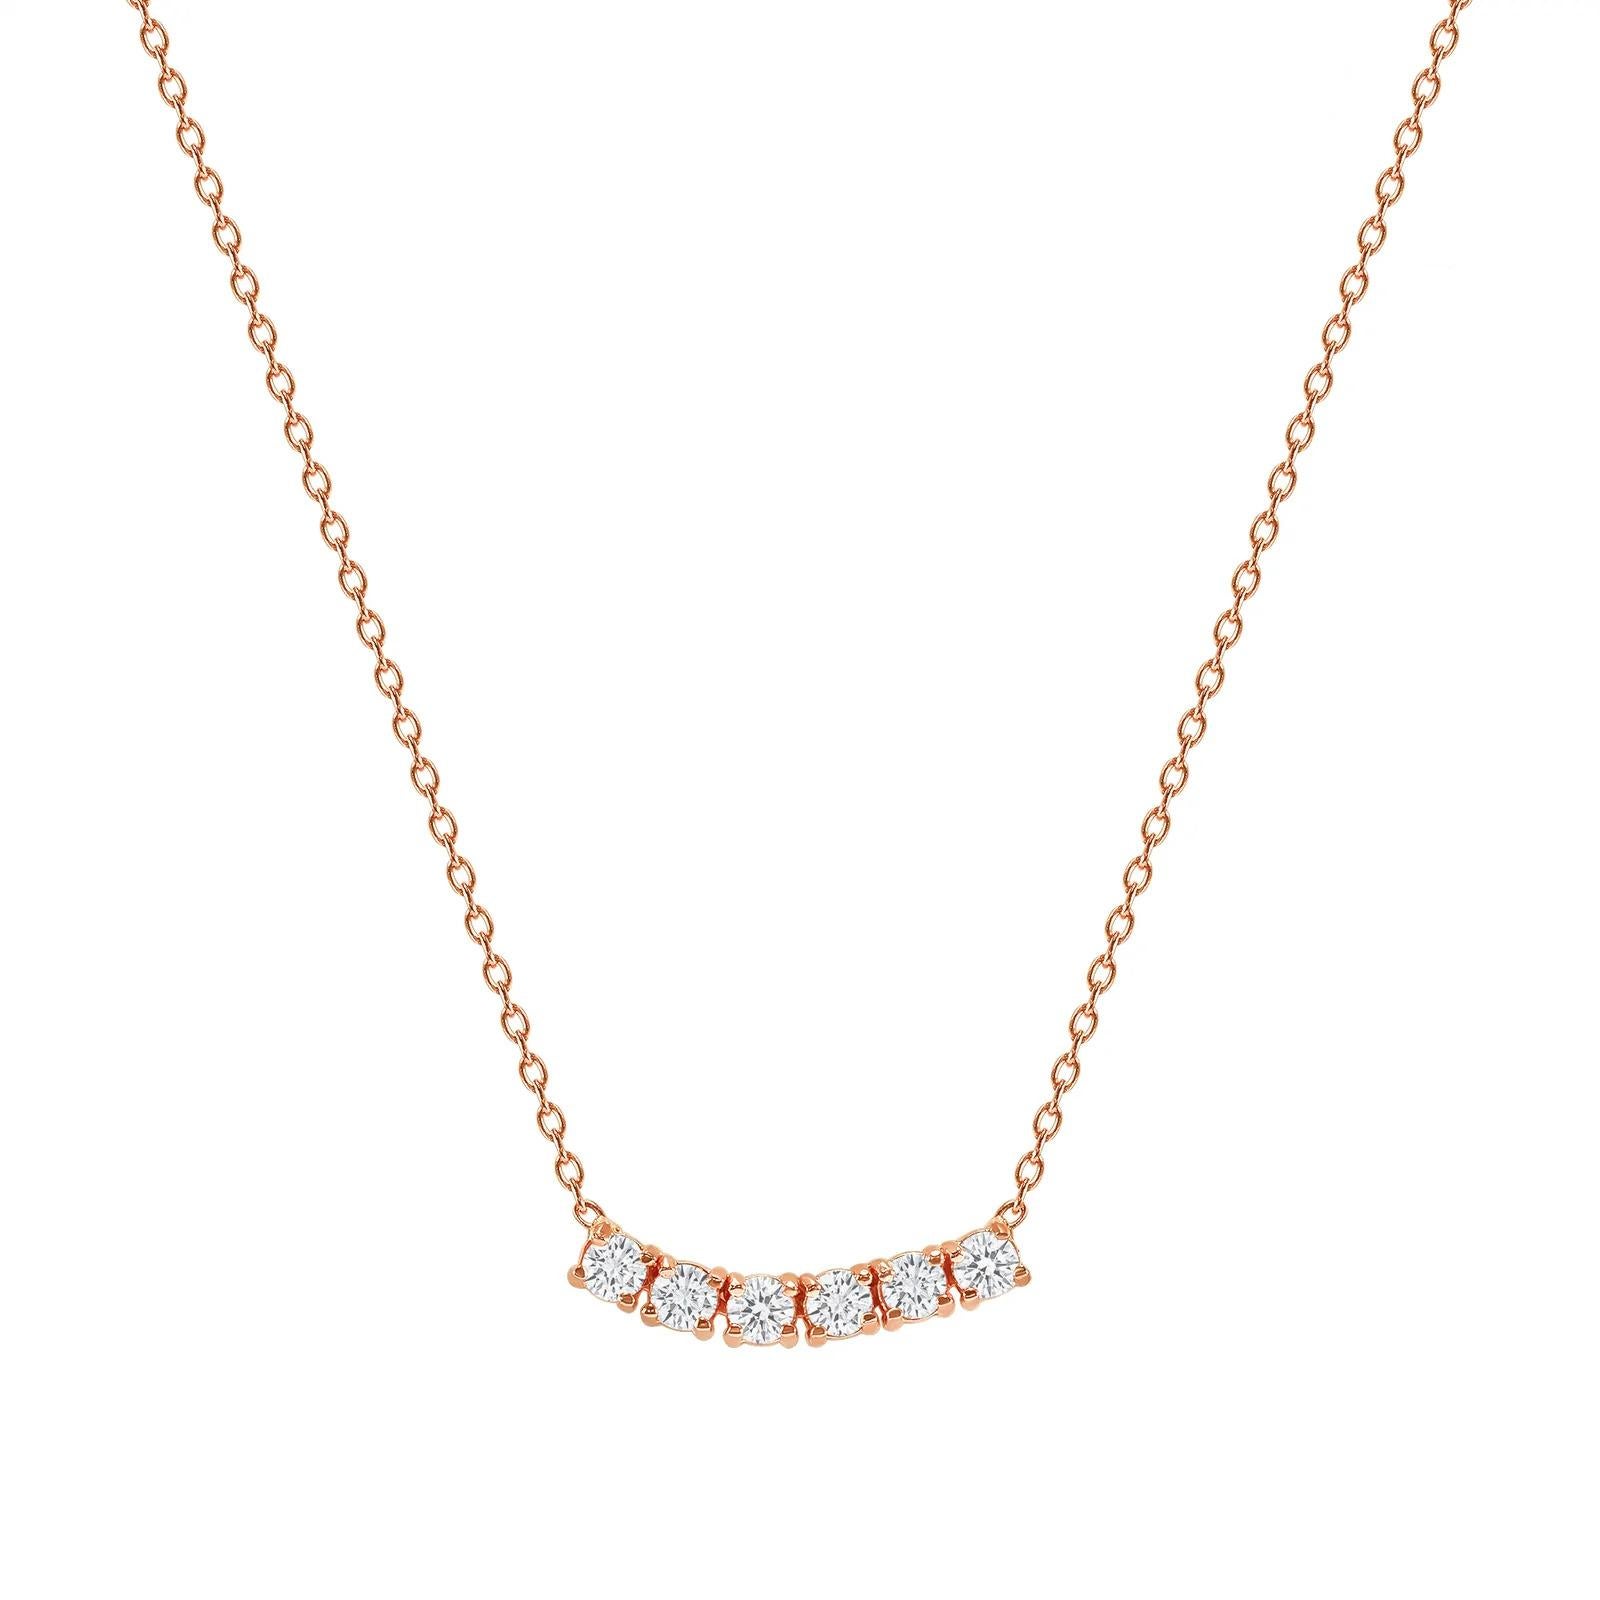 This petite, curved diamond necklace is crafted with gorgeous 14k gold set with six round diamonds.  

Gold: 14k 
Diamond Total Carats: 2 ct
Diamond Cut: Round (6 diamonds)
Diamond Clarity: VS
Diamond Color: F
Color: Rose Gold
Necklace Length: 20